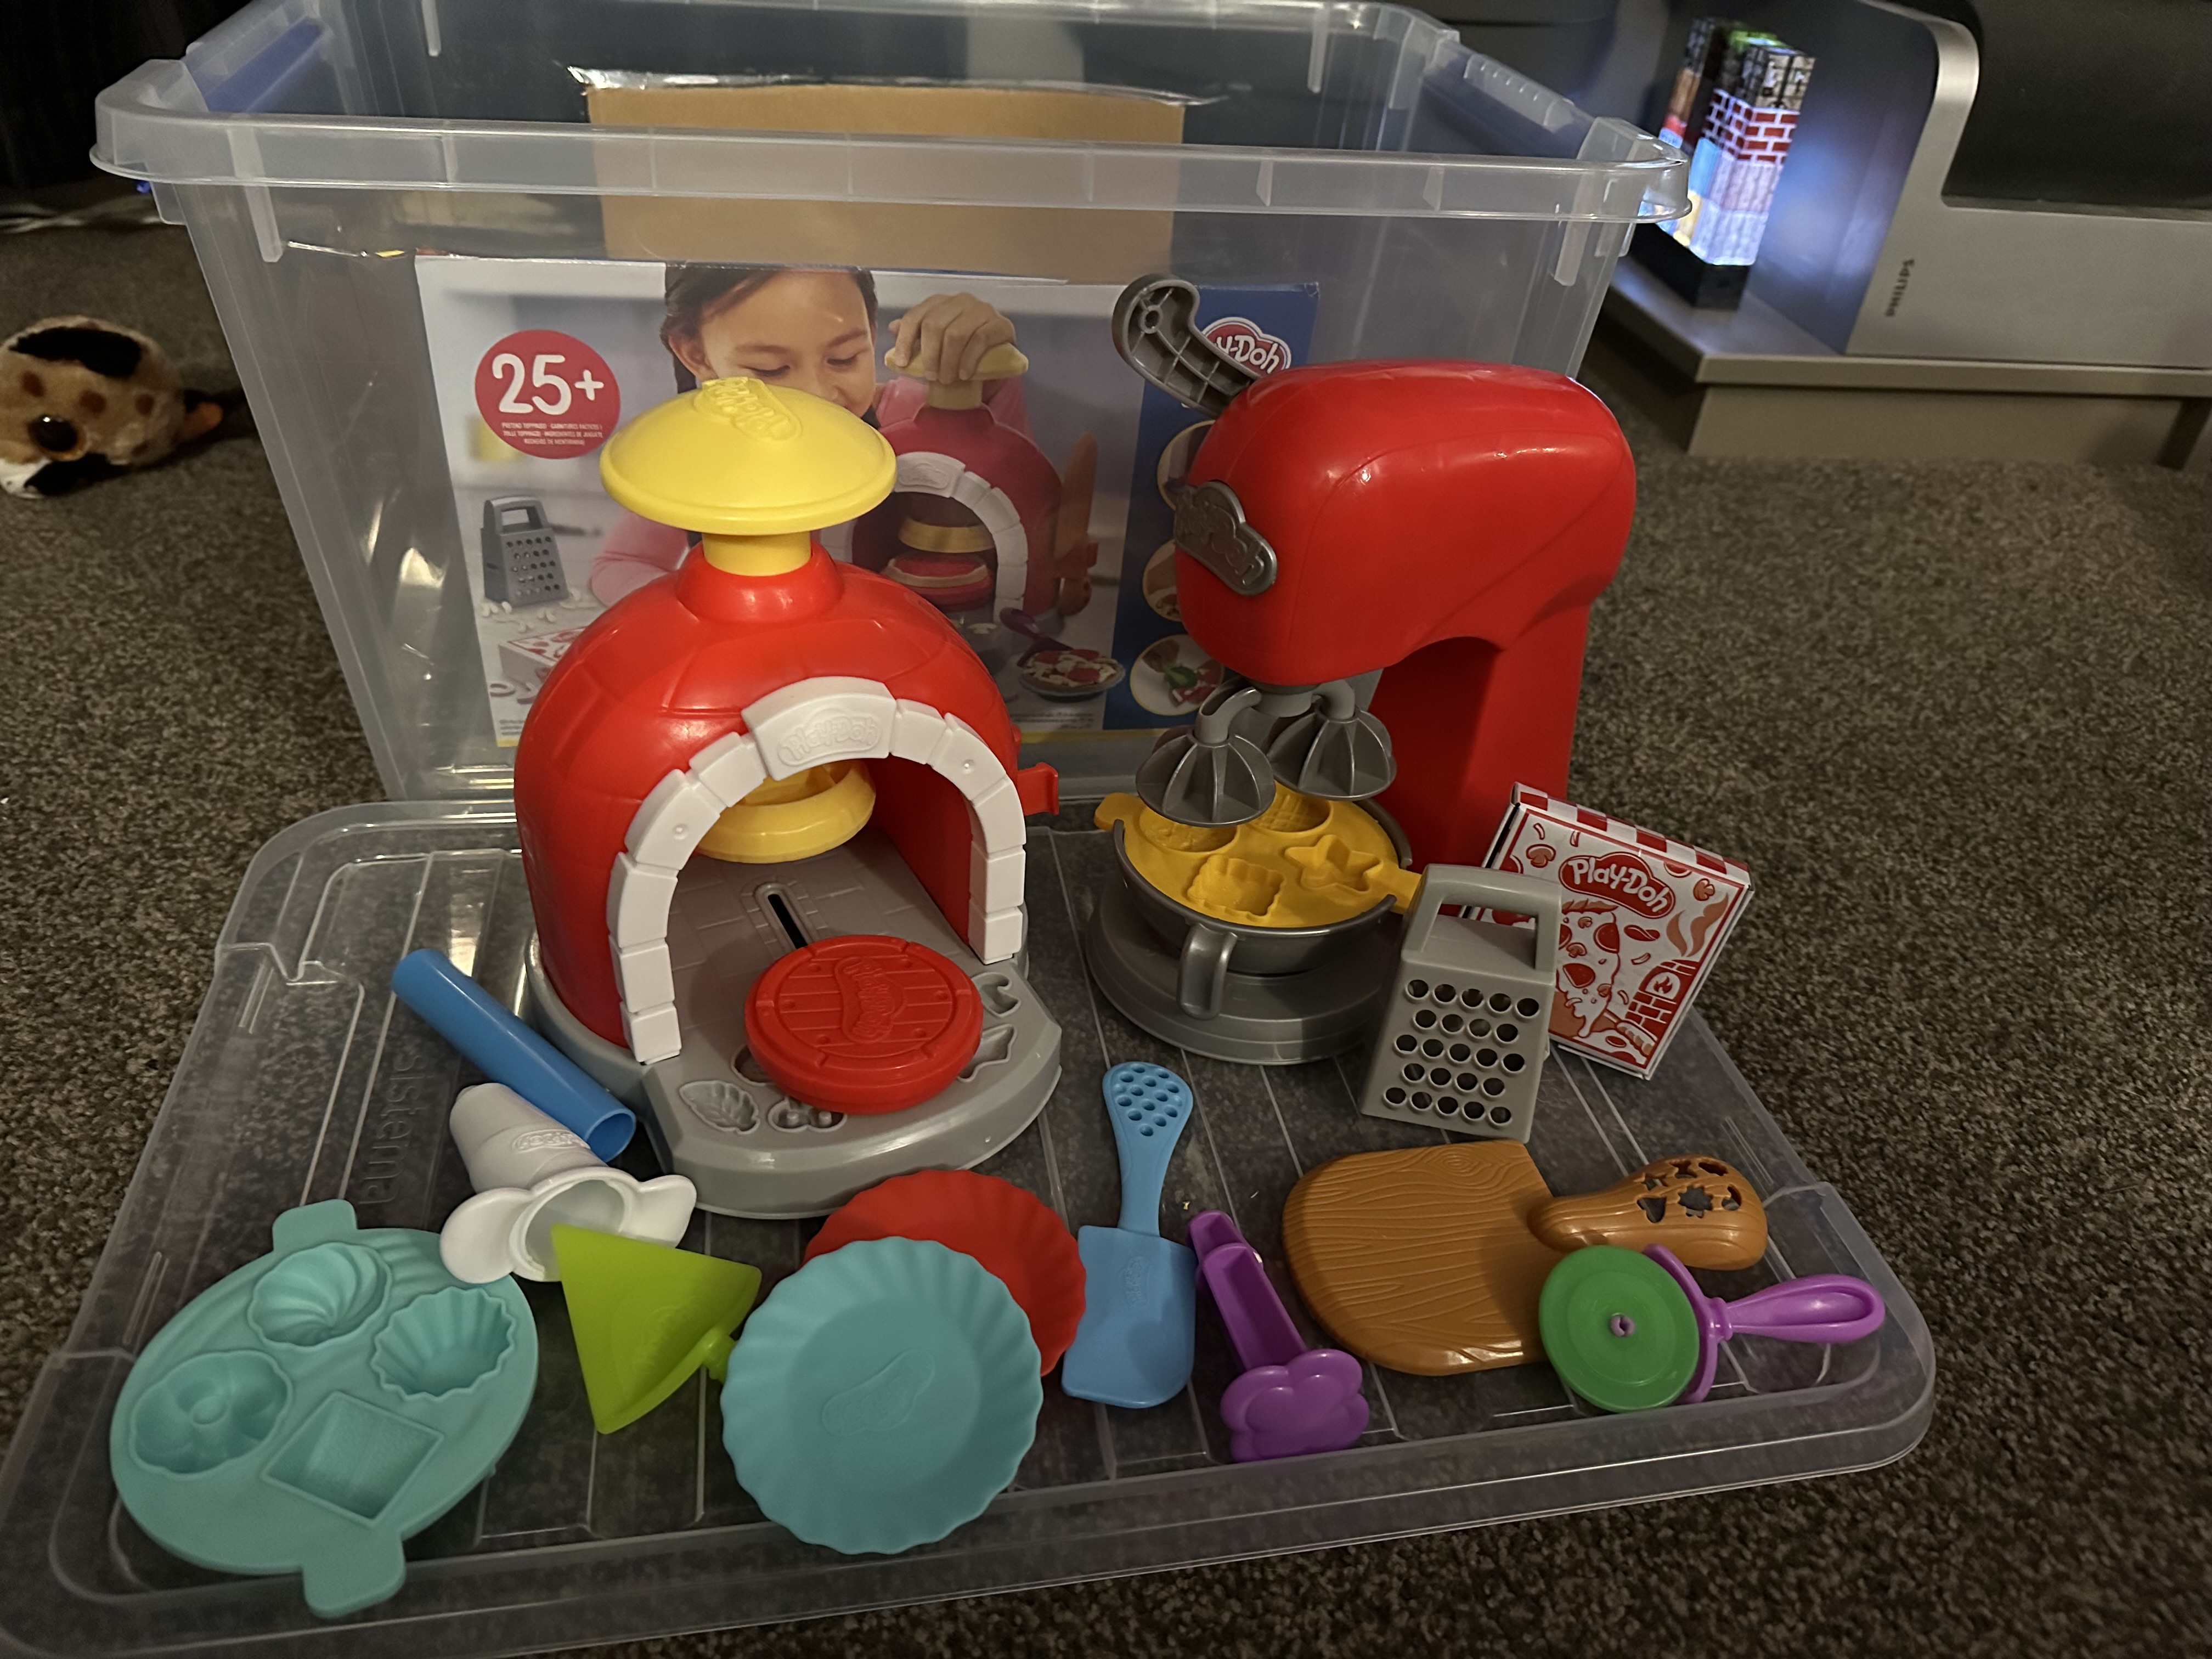 Play-Doh Stamp 'n Top Pizza Oven Toy